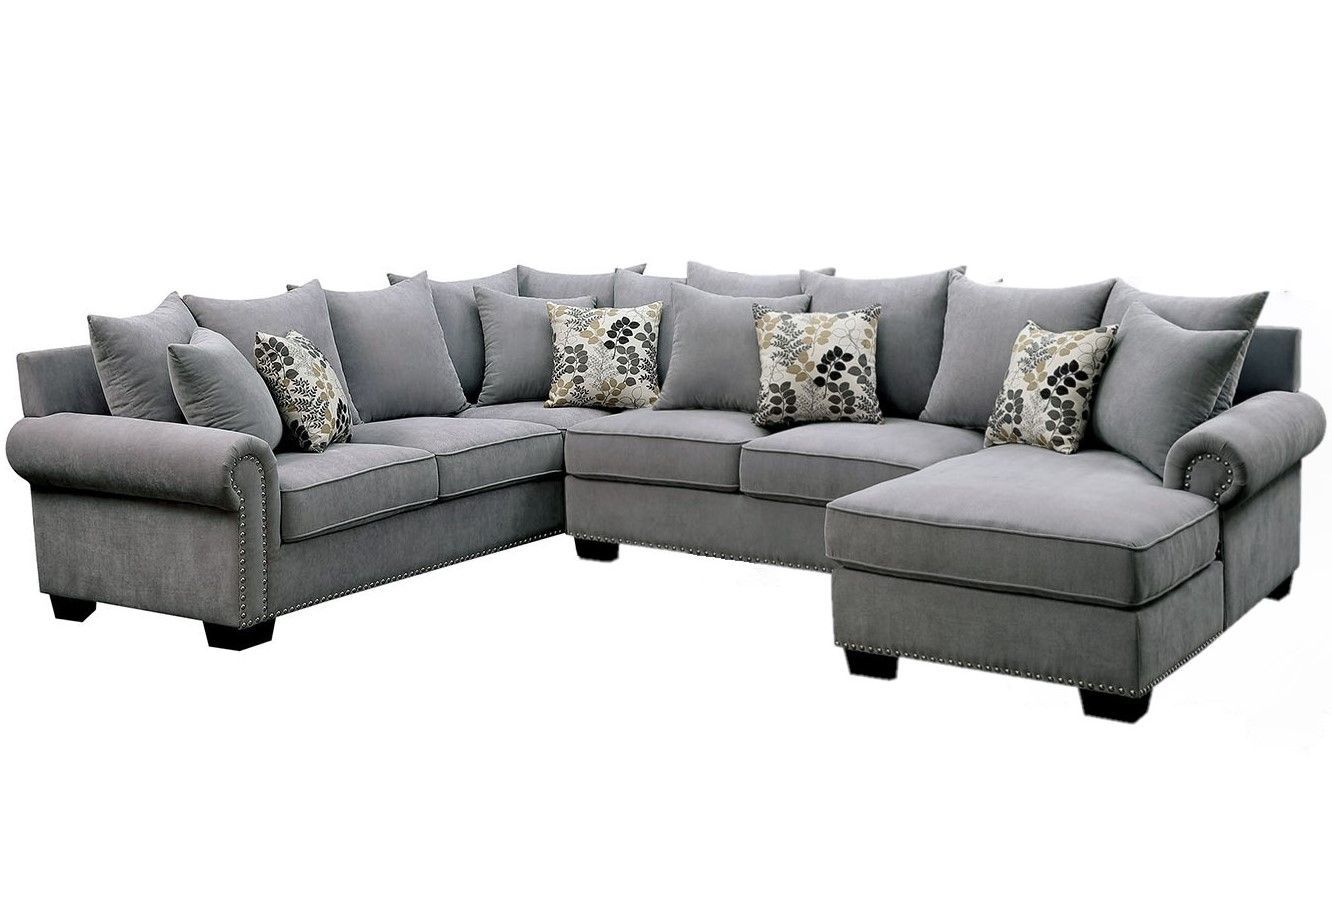 Skyler Ii Transitional Gray Fabric Upholstered Sectional With 2pc Polyfiber Sectional Sofas With Nailhead Trims Gray (View 10 of 15)